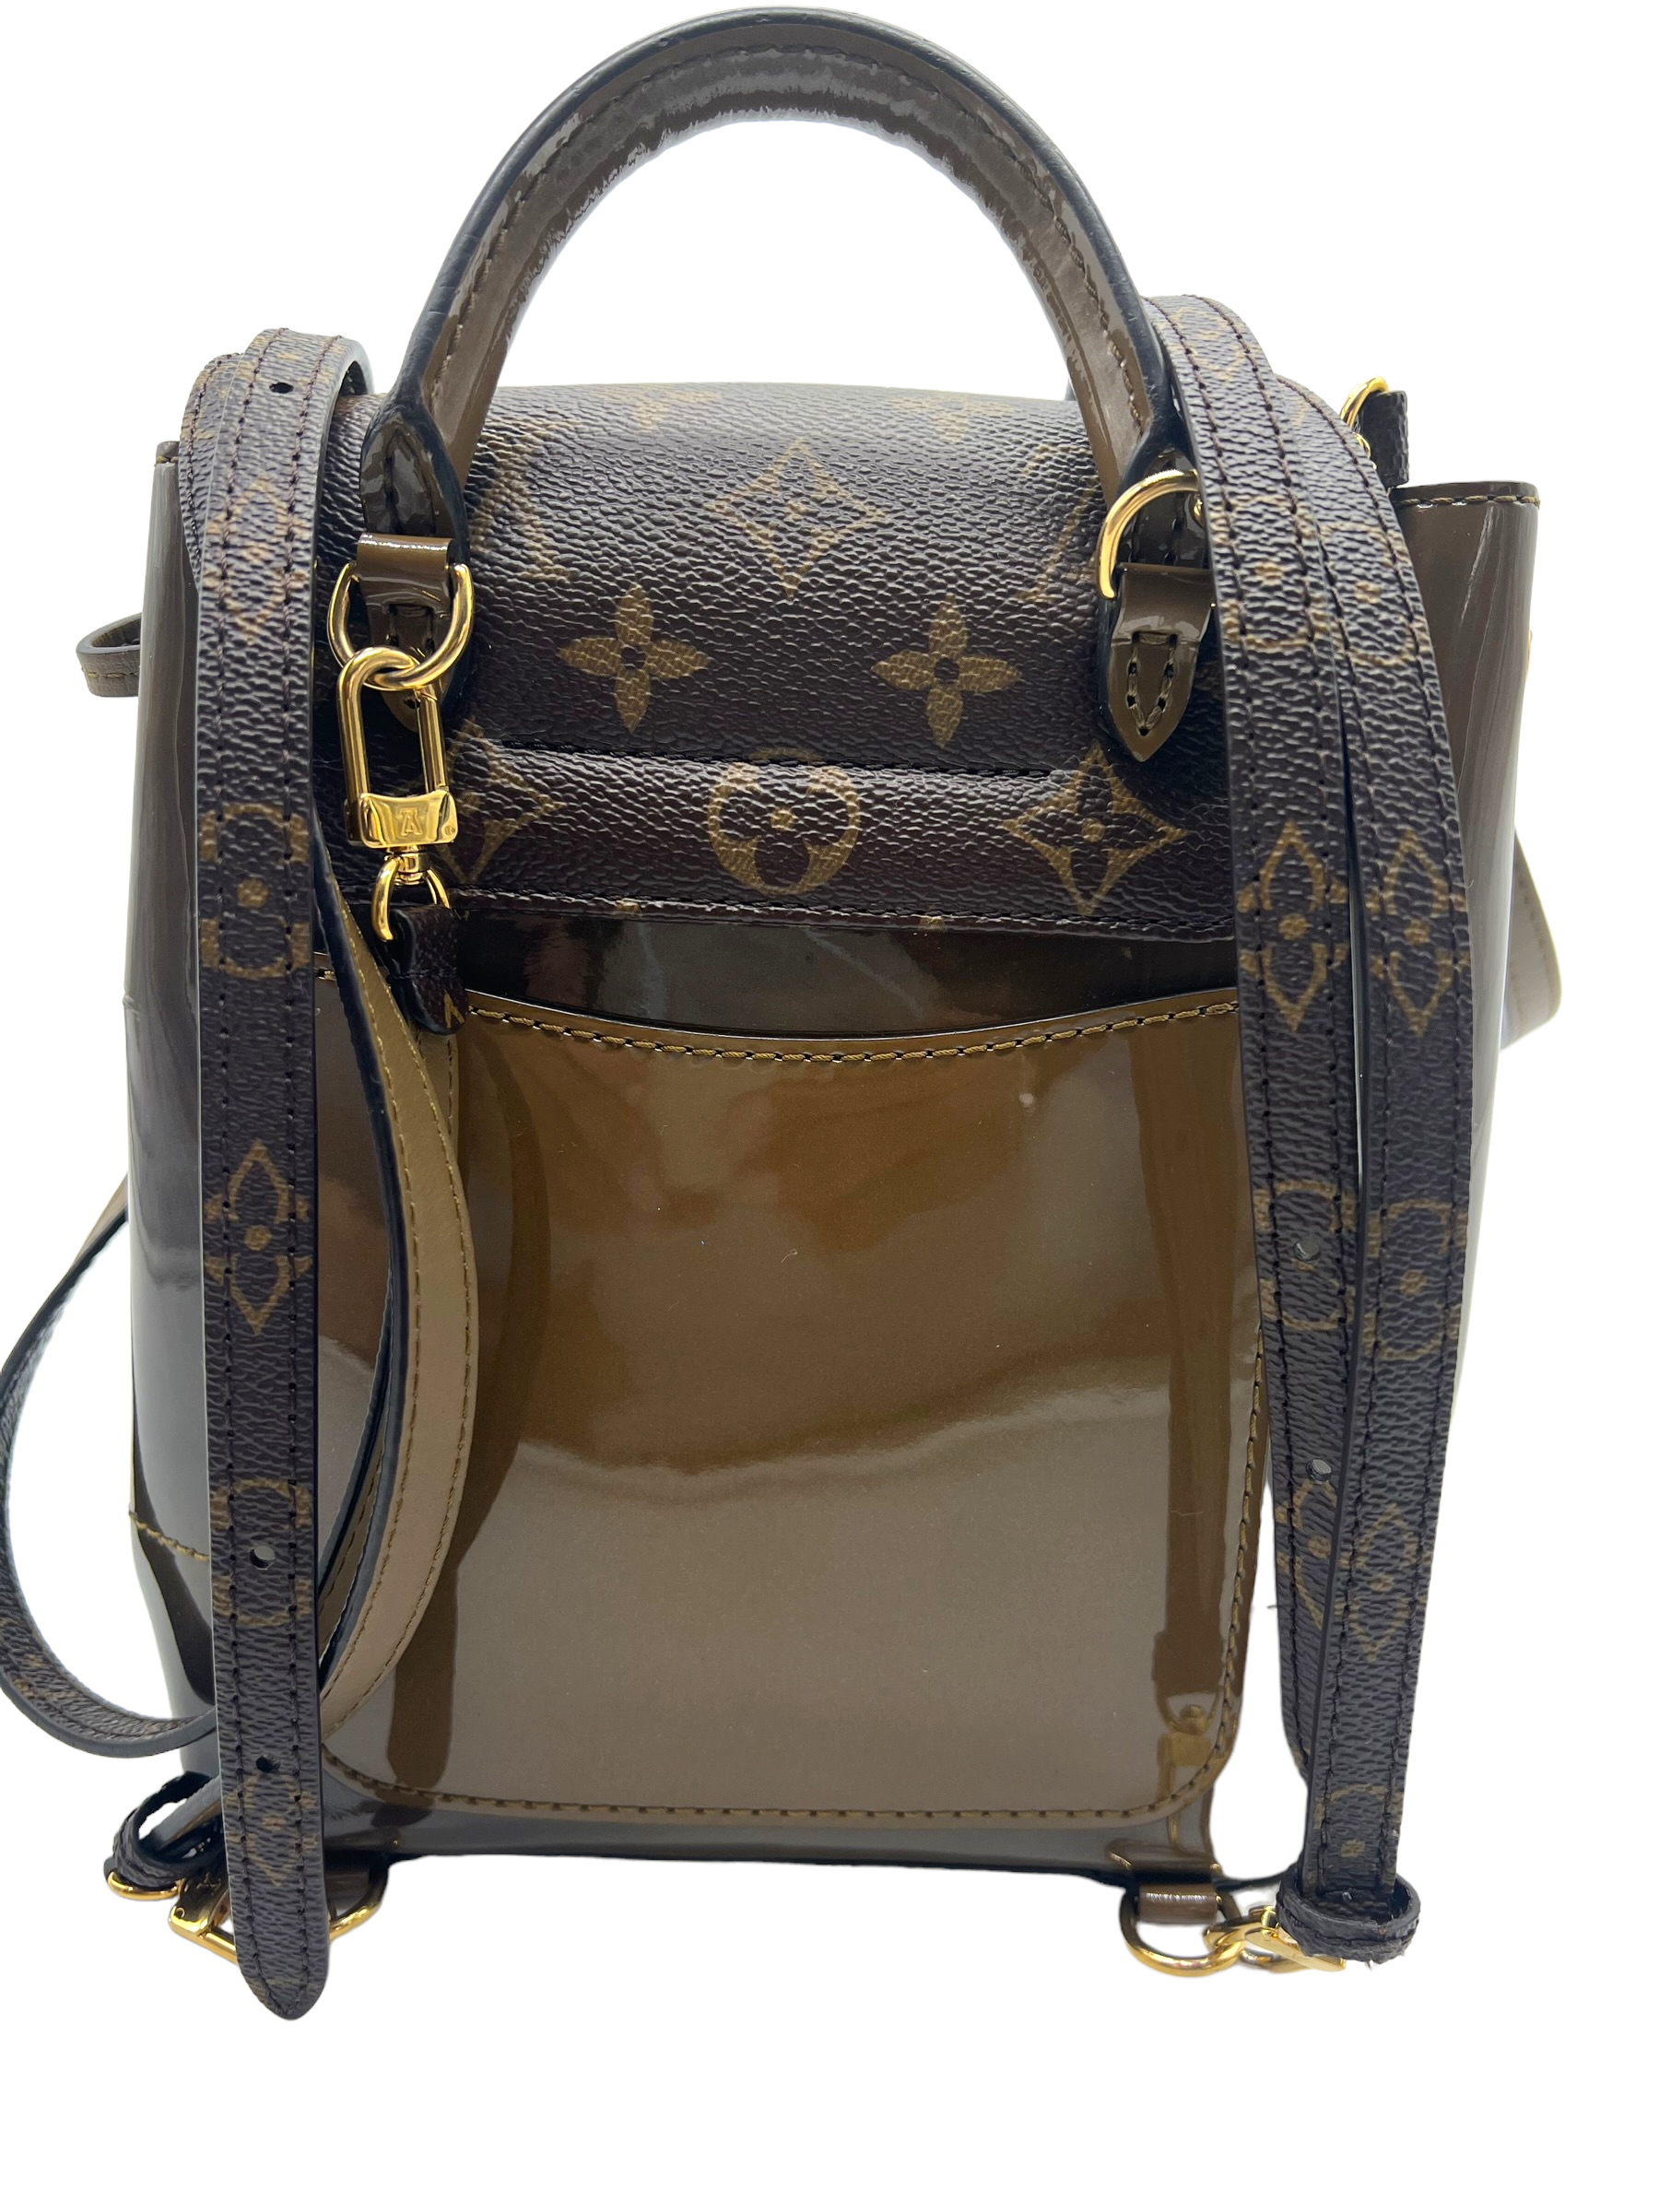 Hot Springs leather backpack